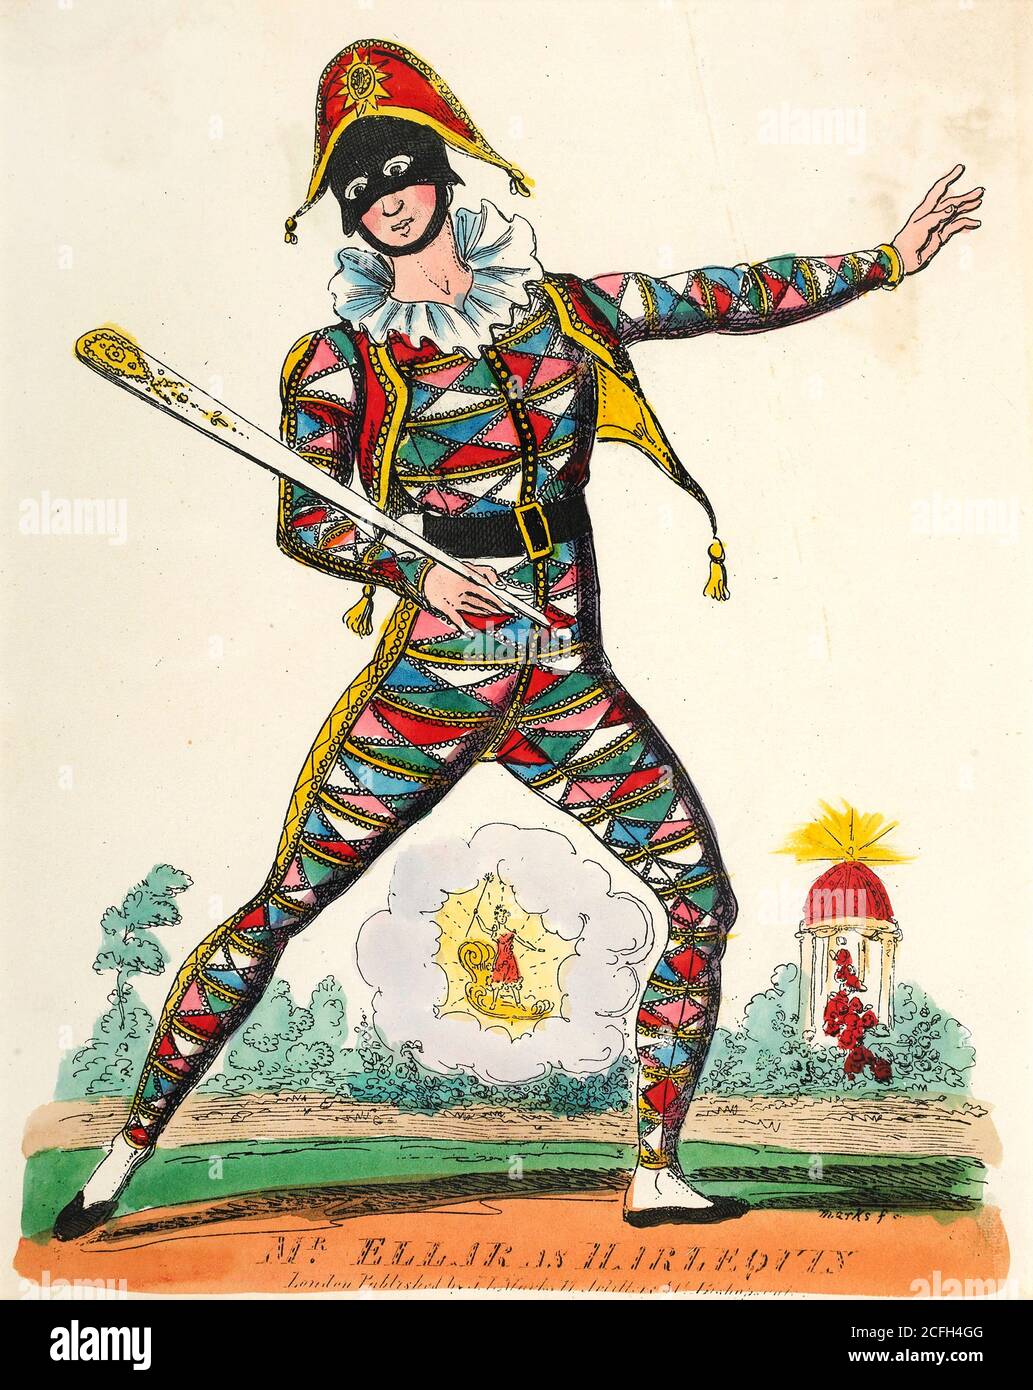 Marks, J.L., Theatrical Portrait, M. Ellar as Harlequin, Circa 1822-1839, Print, Museum of London, Angleterre. Banque D'Images